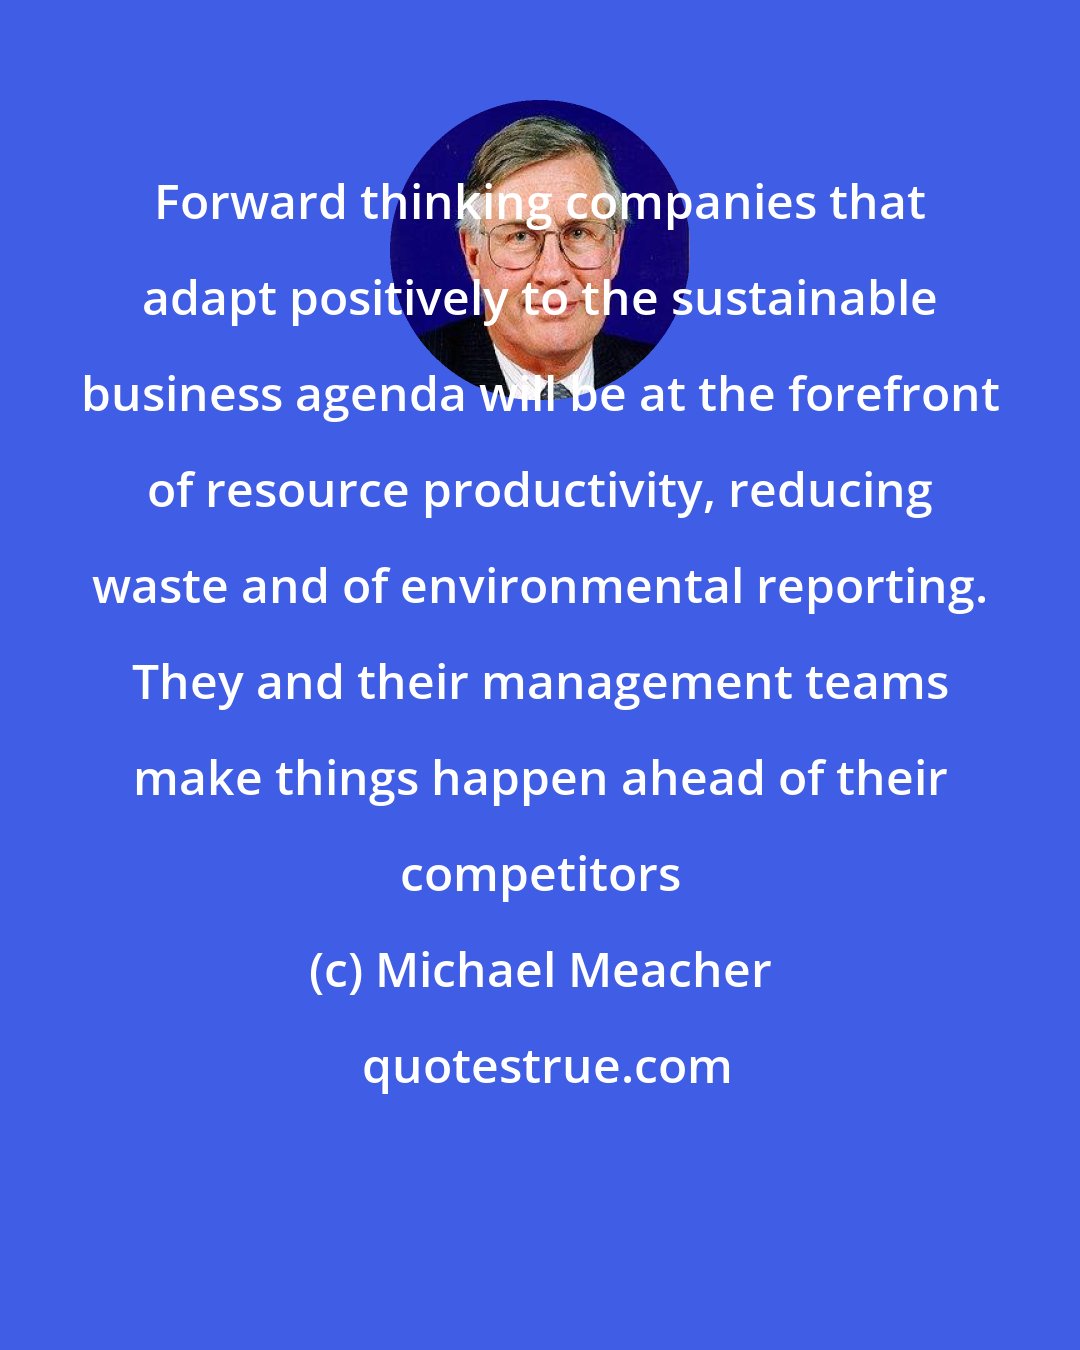 Michael Meacher: Forward thinking companies that adapt positively to the sustainable business agenda will be at the forefront of resource productivity, reducing waste and of environmental reporting. They and their management teams make things happen ahead of their competitors